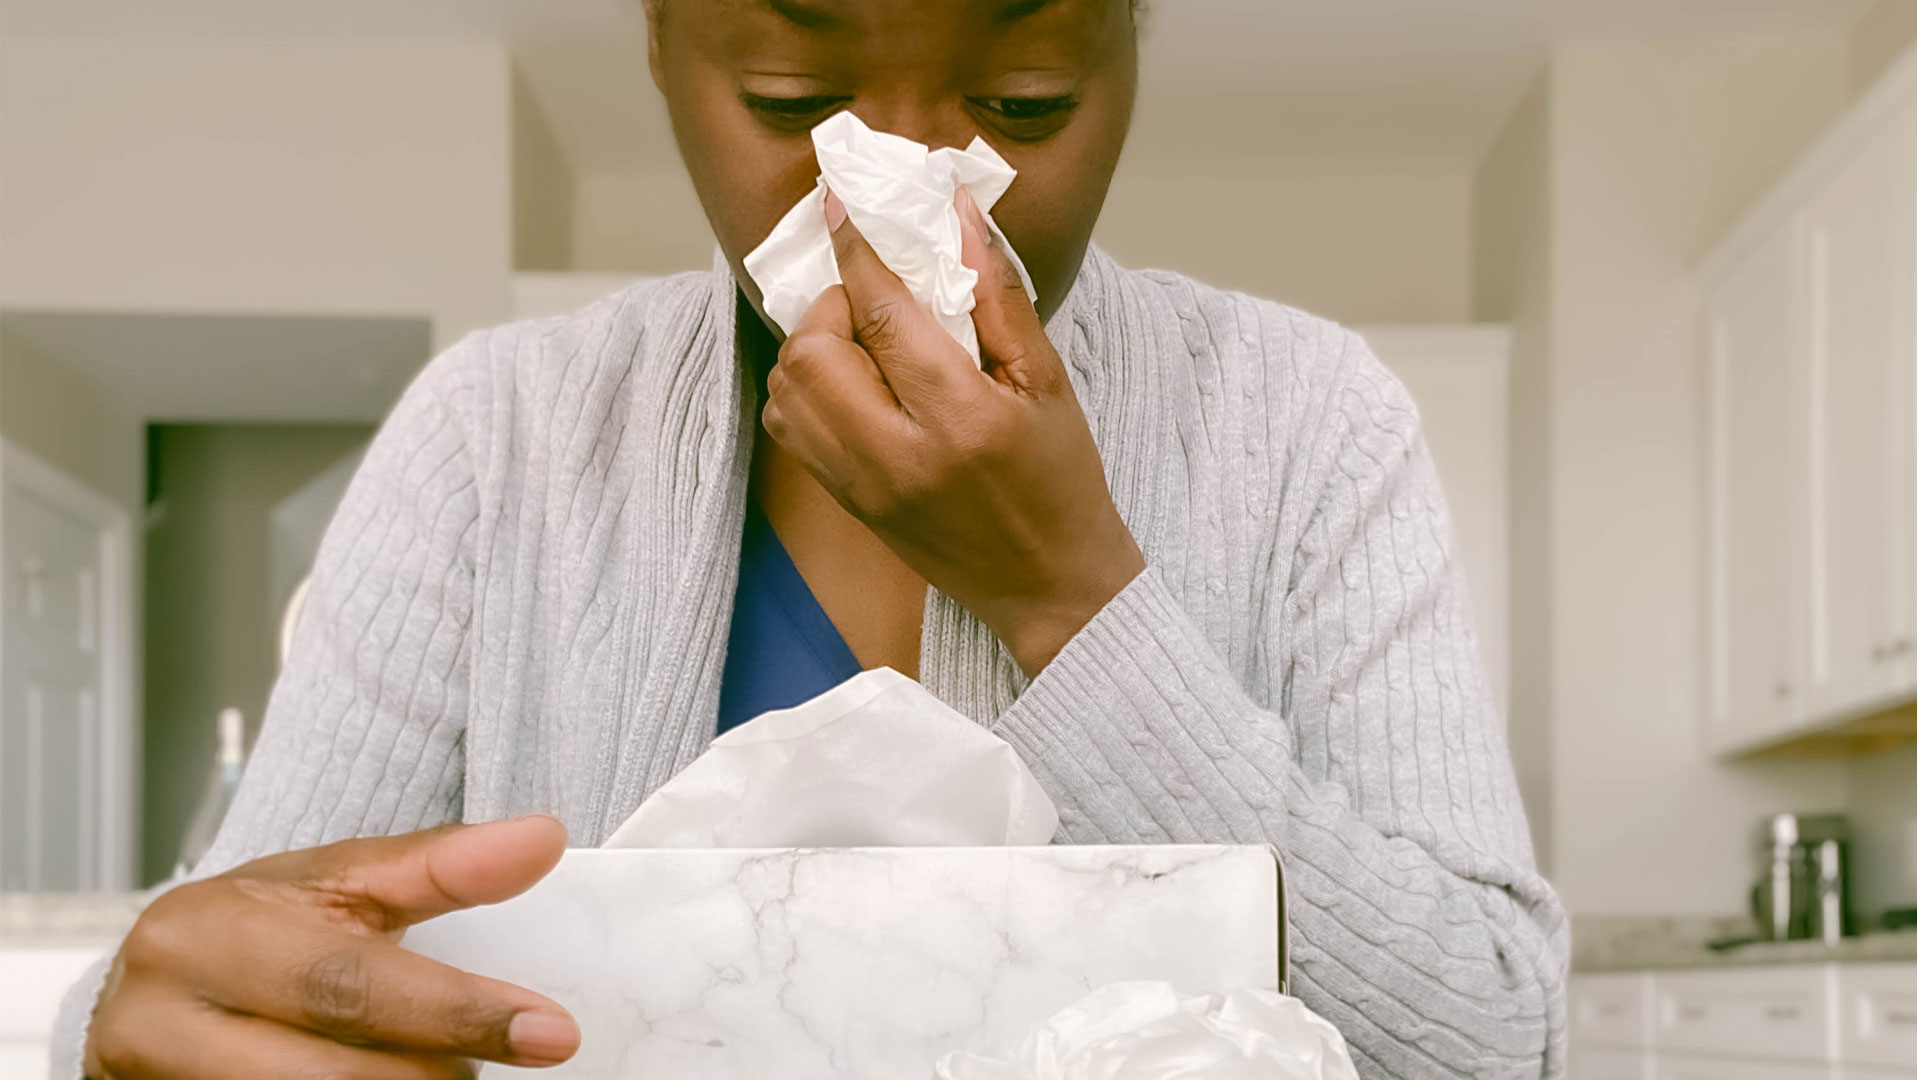 Image shows woman blowing her nose with a tissue